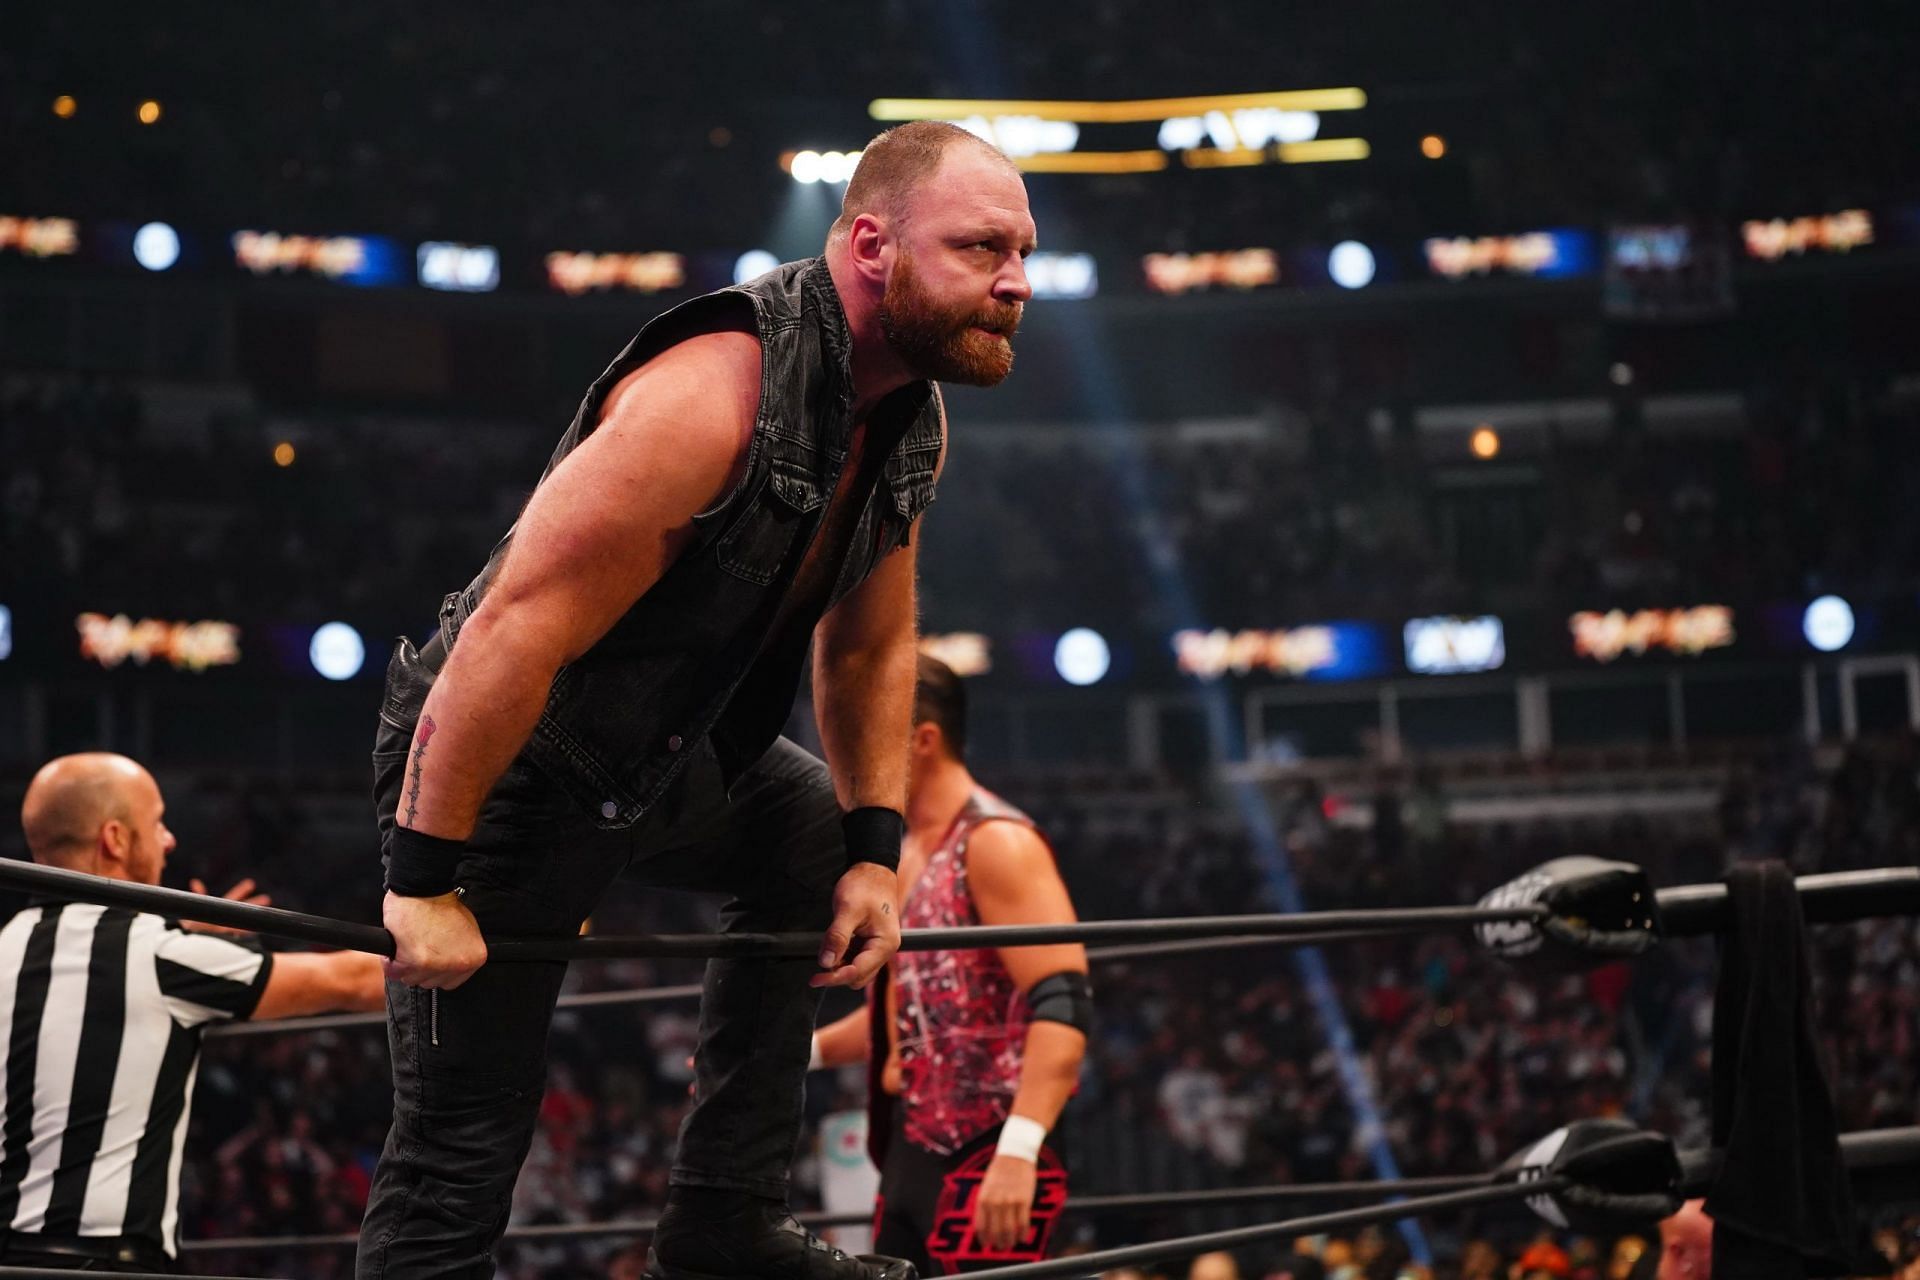 Jox Moxley is AEW&#039;s version of Stone Cold